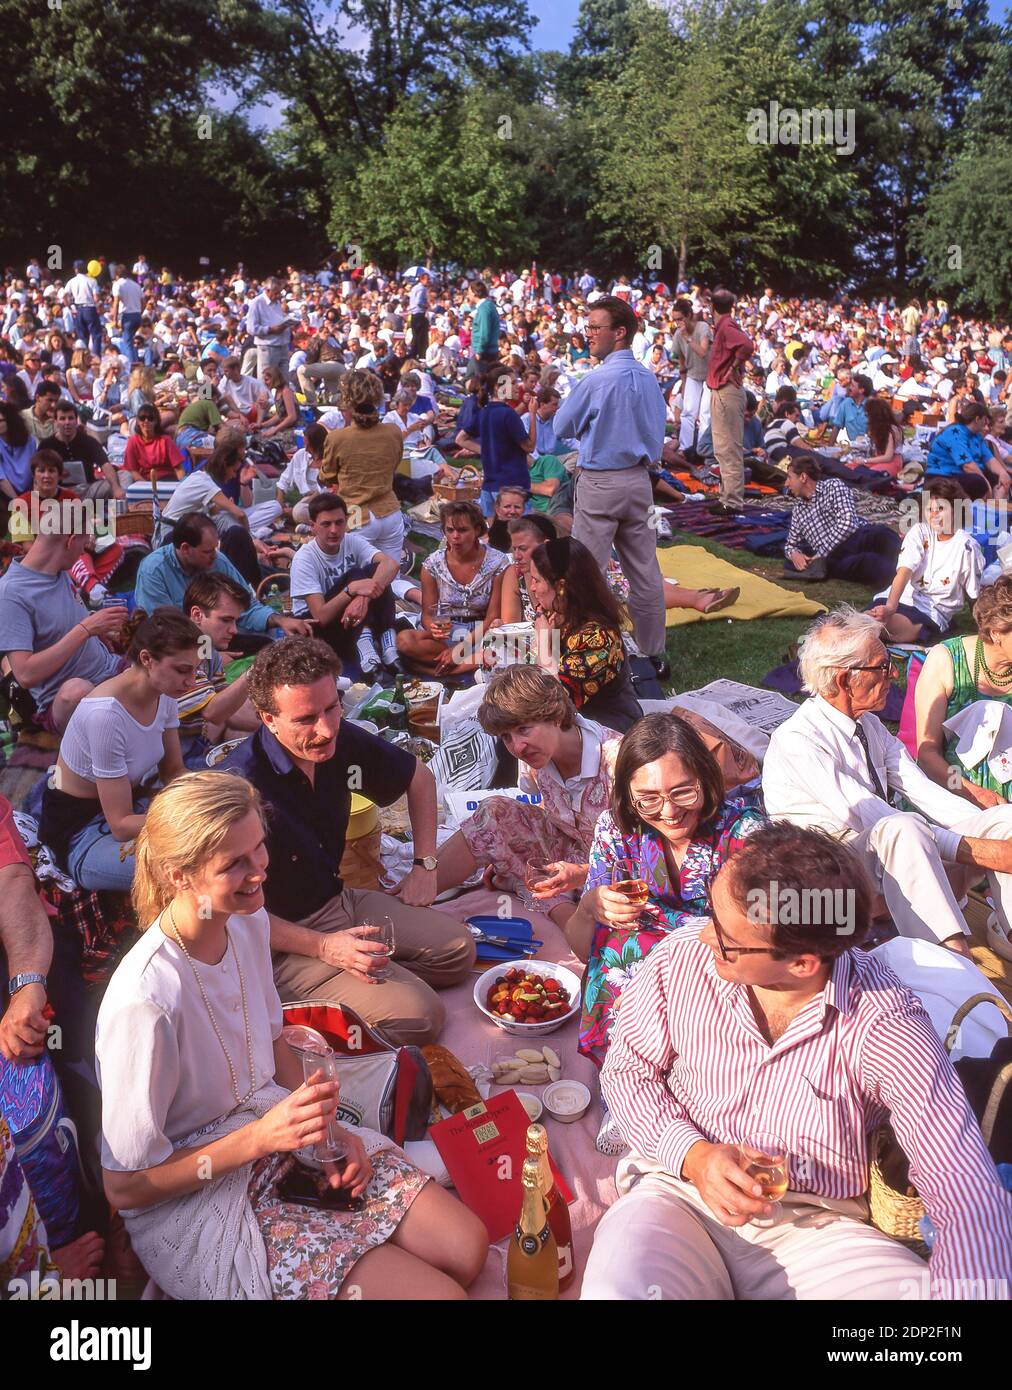 Picnics at 'Live by the Lake' Concert, Kenwood House, Hampstead Heath, Hampstead, Borough of Camden, Greater London, England, United Kingdom Stock Photo